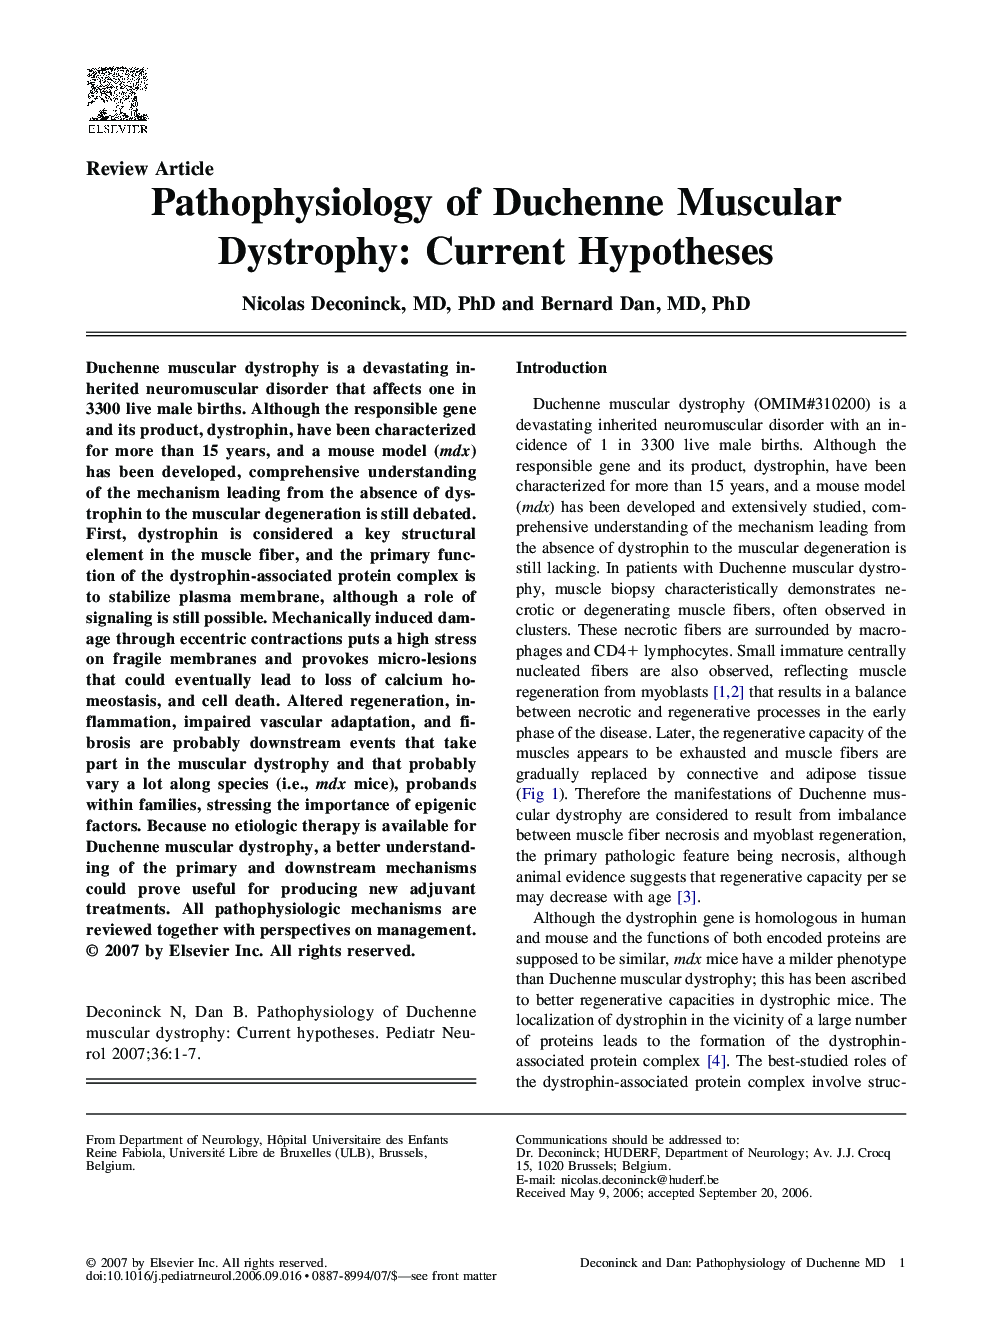 Pathophysiology of Duchenne Muscular Dystrophy: Current Hypotheses